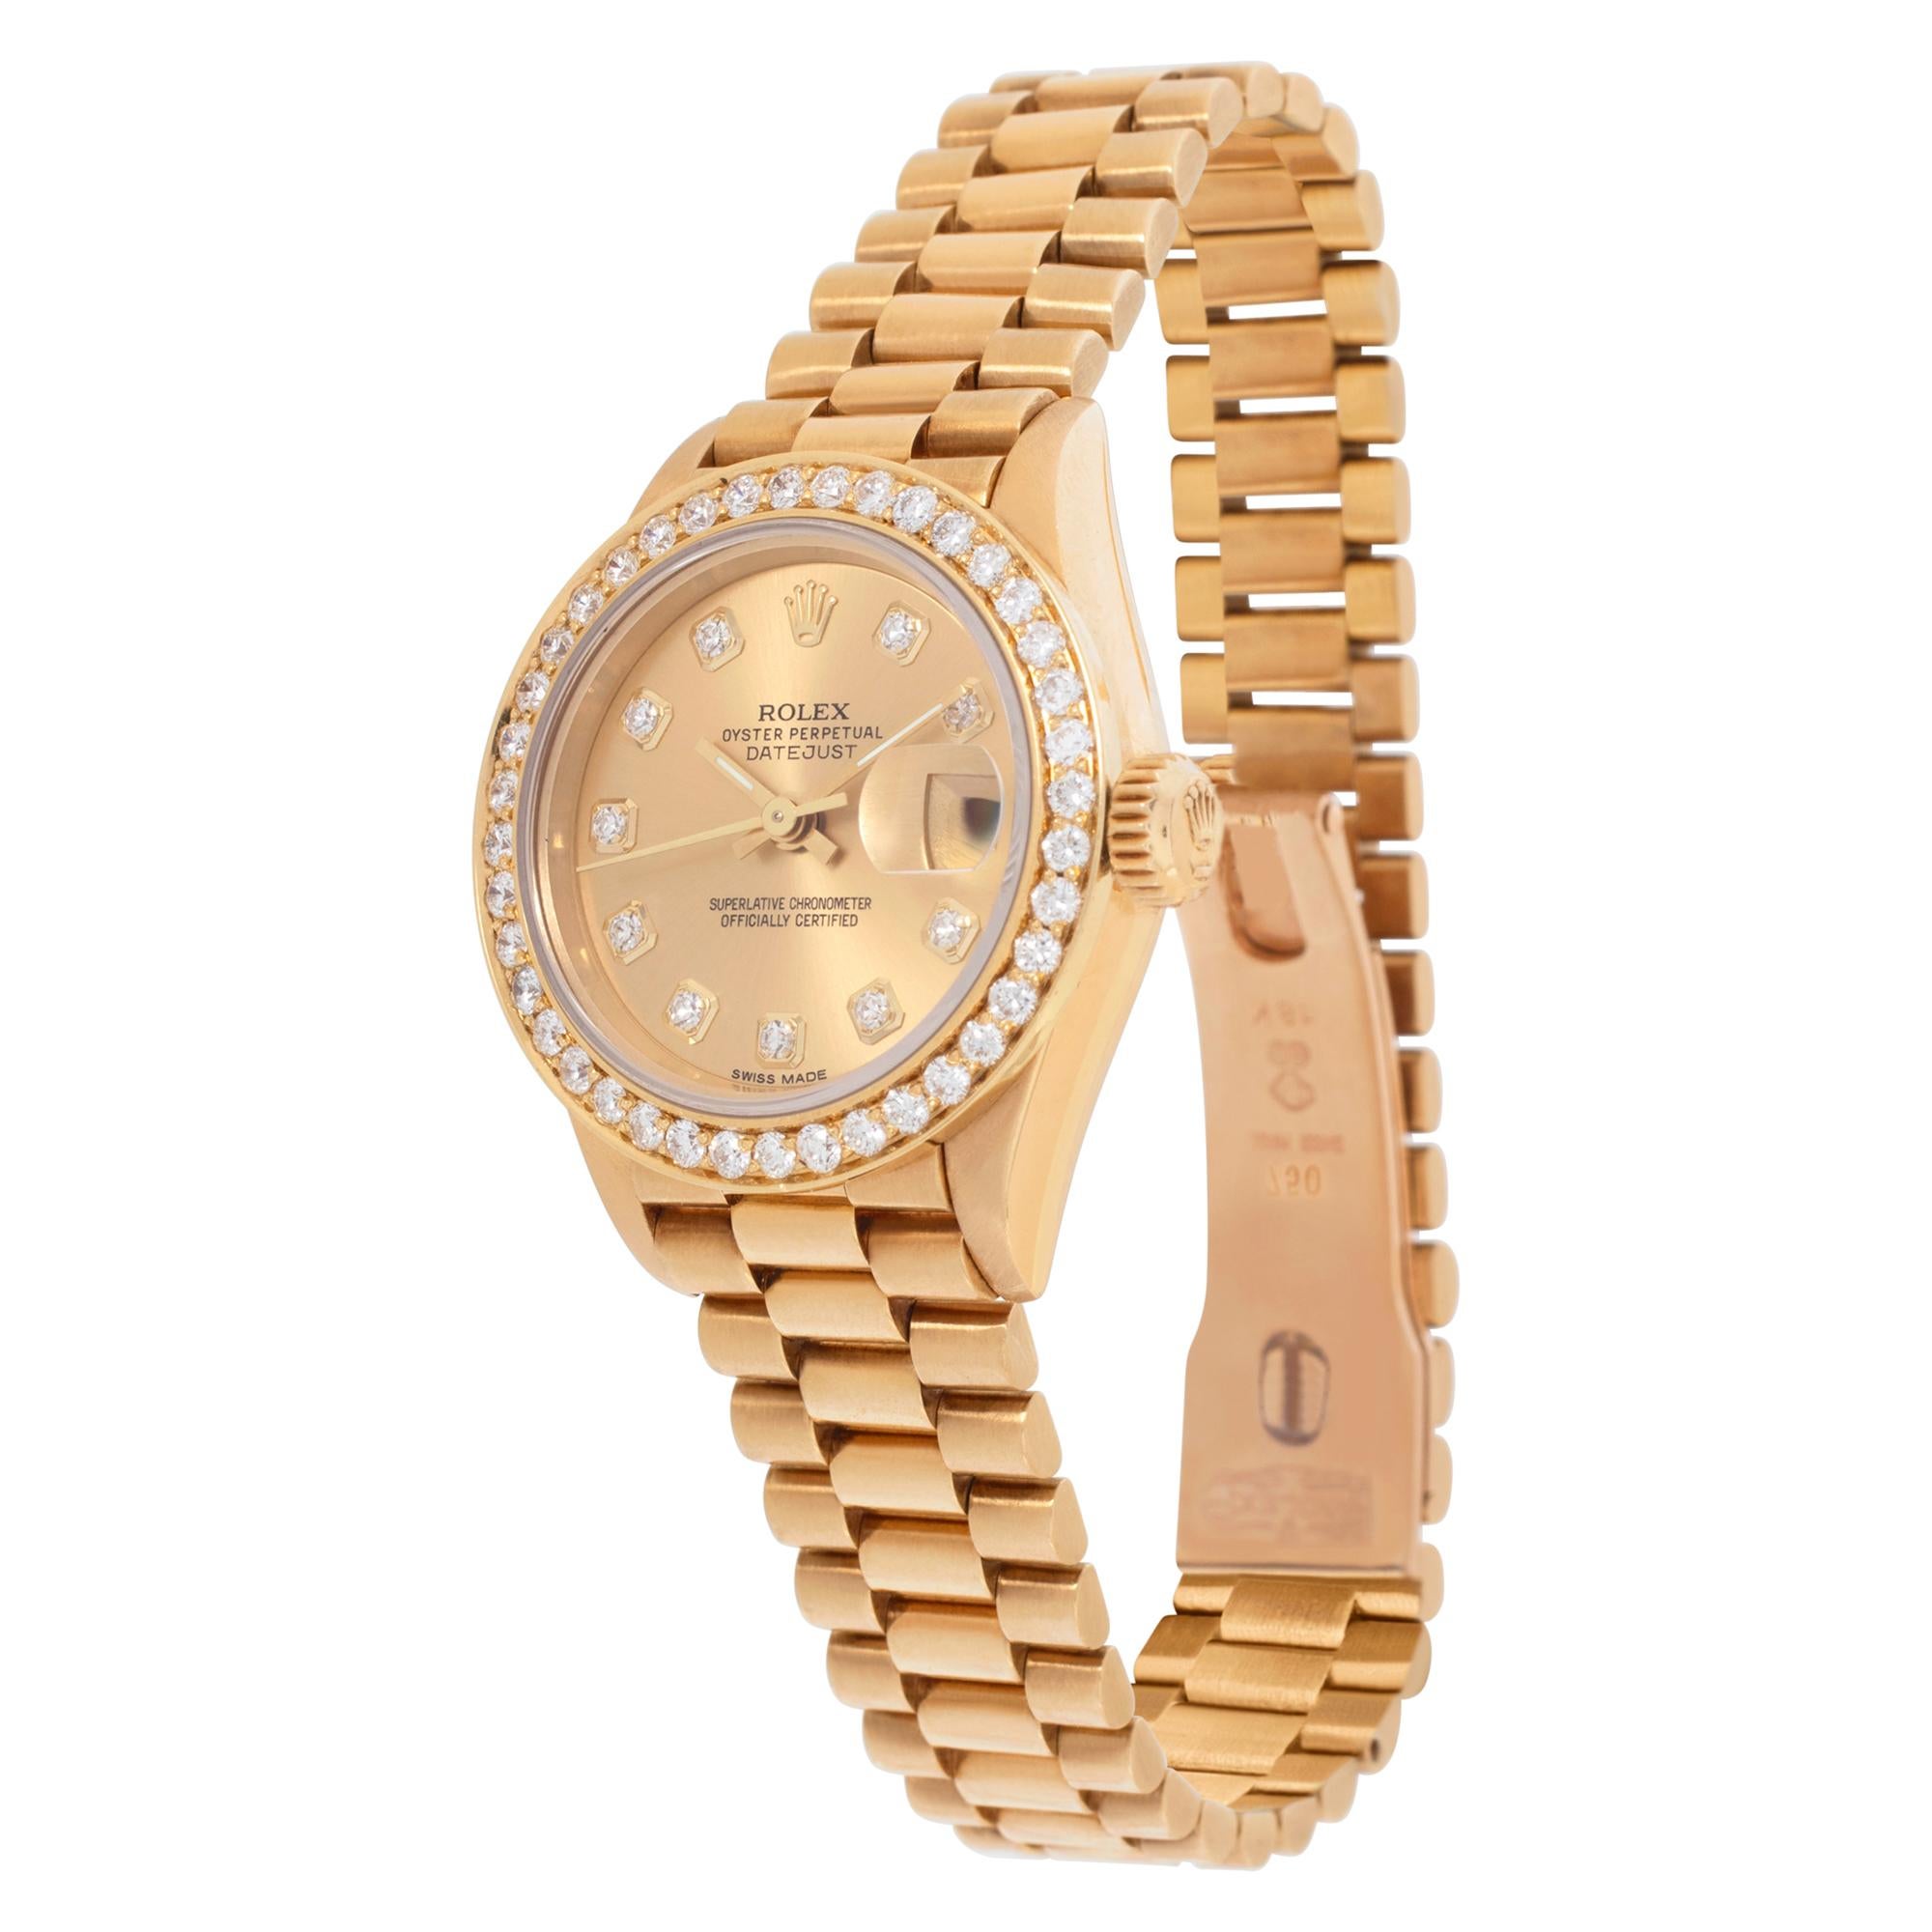 Rolex Datejust in 18k yellow gold with original diamond dial and custom diamond bezel. Auto w/ sweep seconds and date. 26 mm case size. Ref 69178. Circa 1995. **Bank Wire Only At This Price** Fine Pre-owned Rolex Watch.

Certified preowned Classic